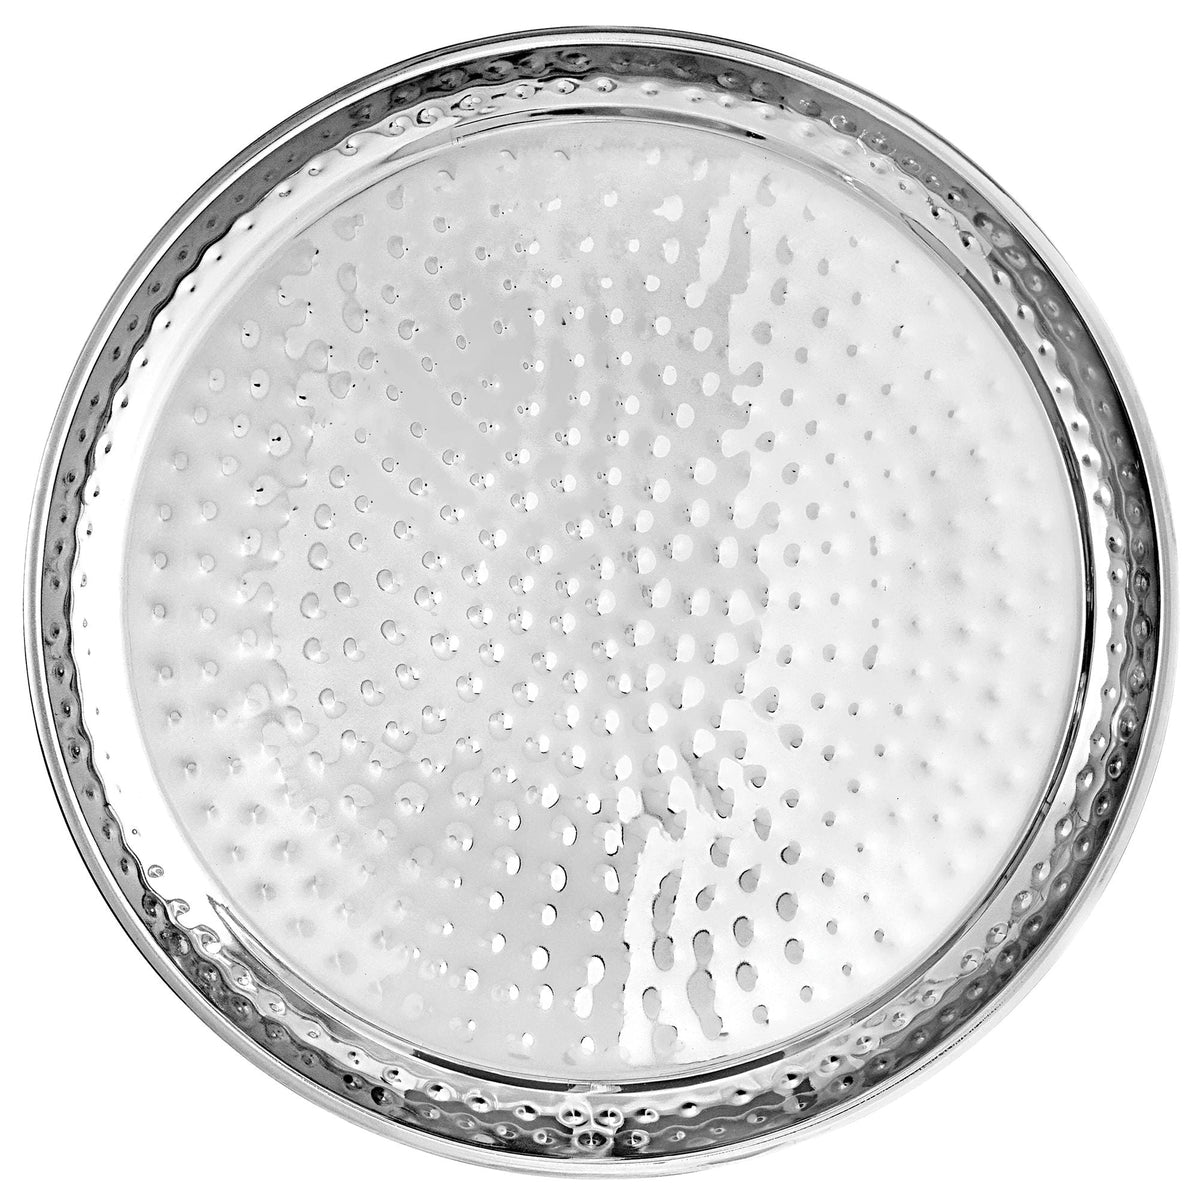 AMSCAN CA Disposable-Plasticware Silver Stainless Steel Hammered Tray, 16 Inches, 1 Count